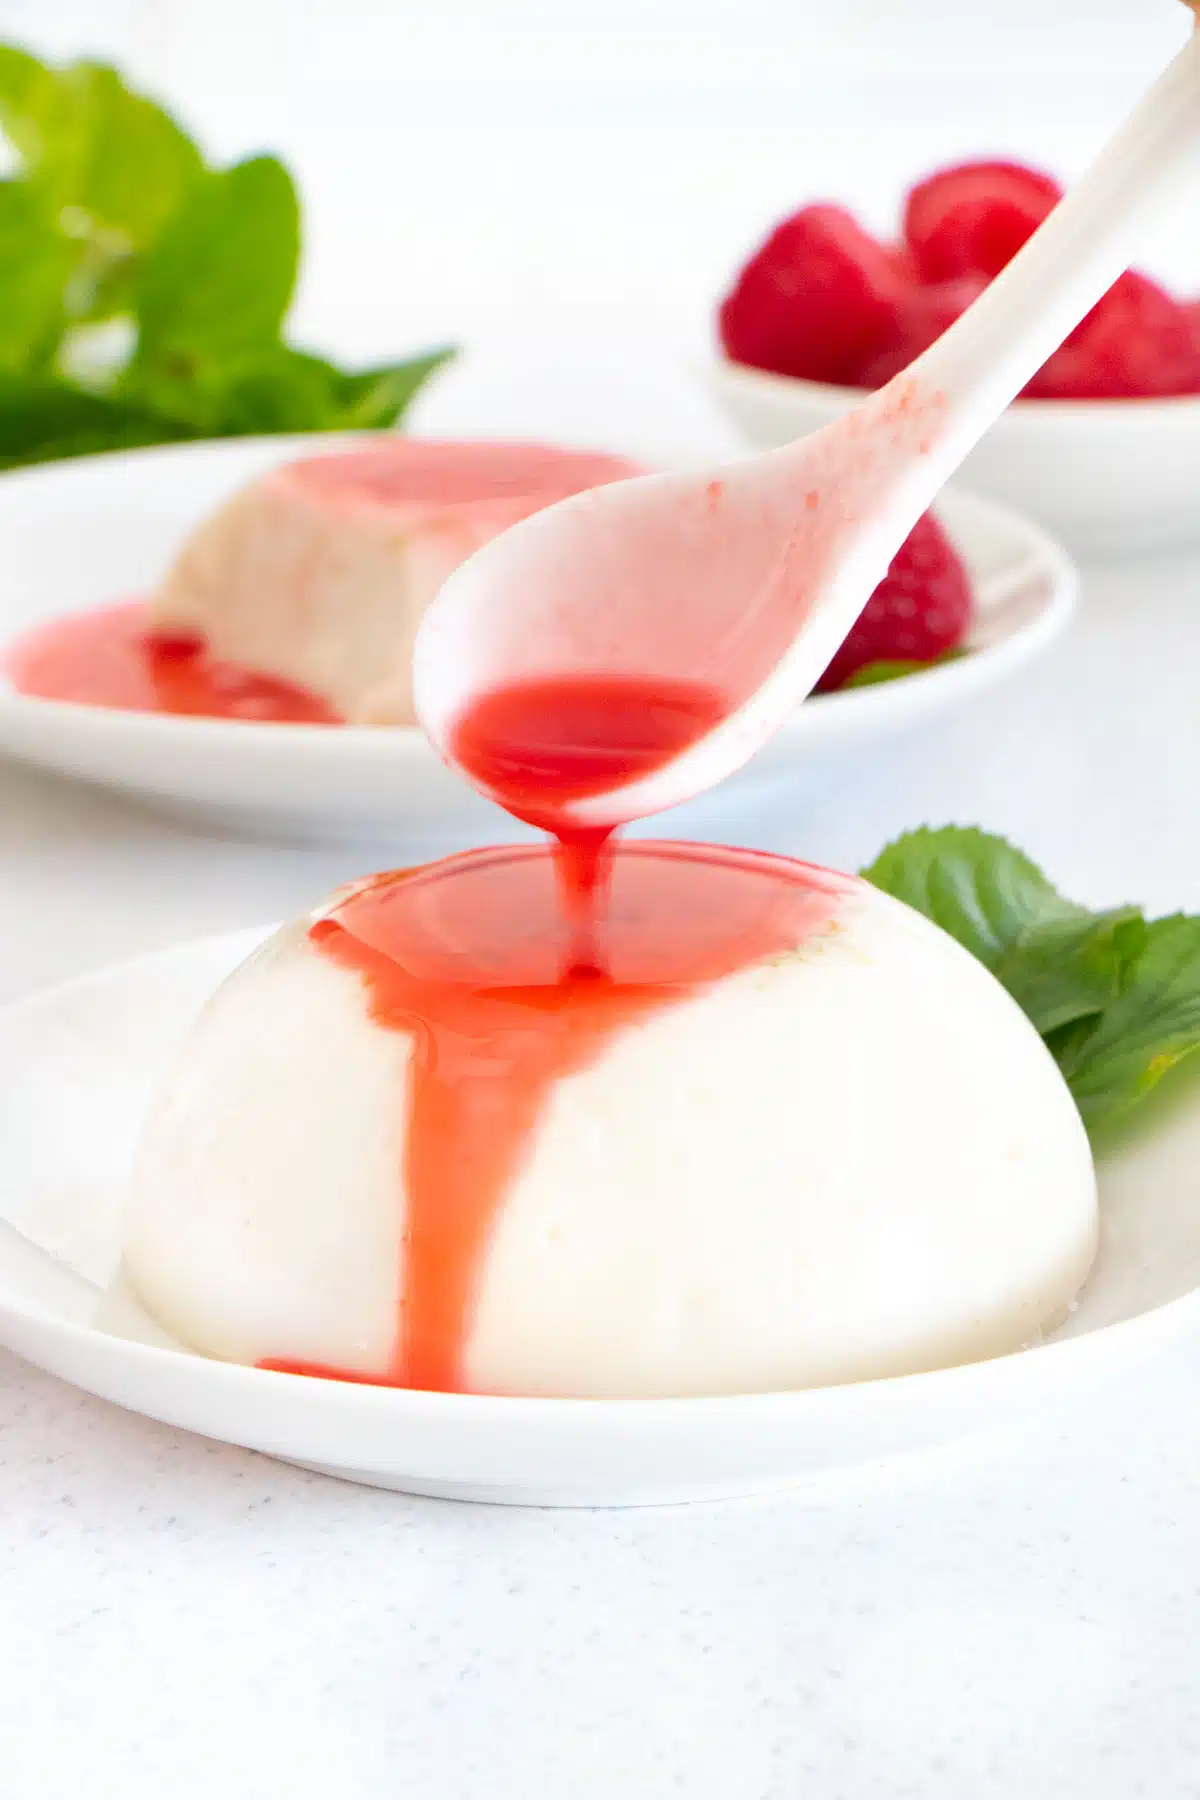 Bright red raspberry coulis is being poured over a small white coconut panna cotta sitting on a white plate.